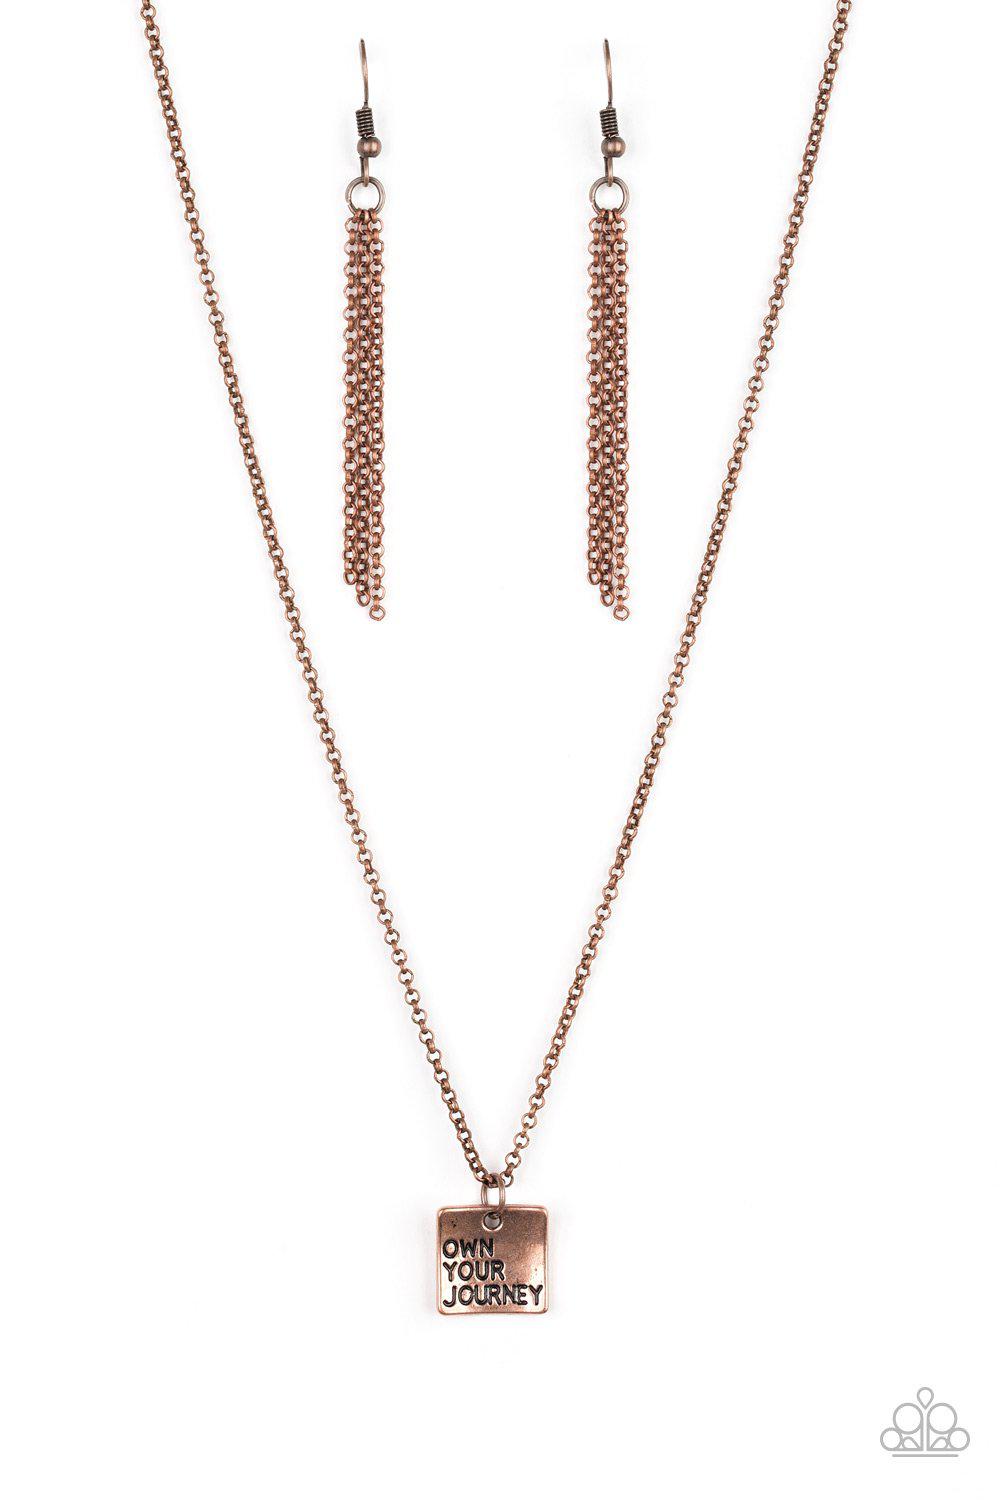 Own Your Journey Copper Word Necklace and matching Earrings - Paparazzi Accessories-CarasShop.com - $5 Jewelry by Cara Jewels